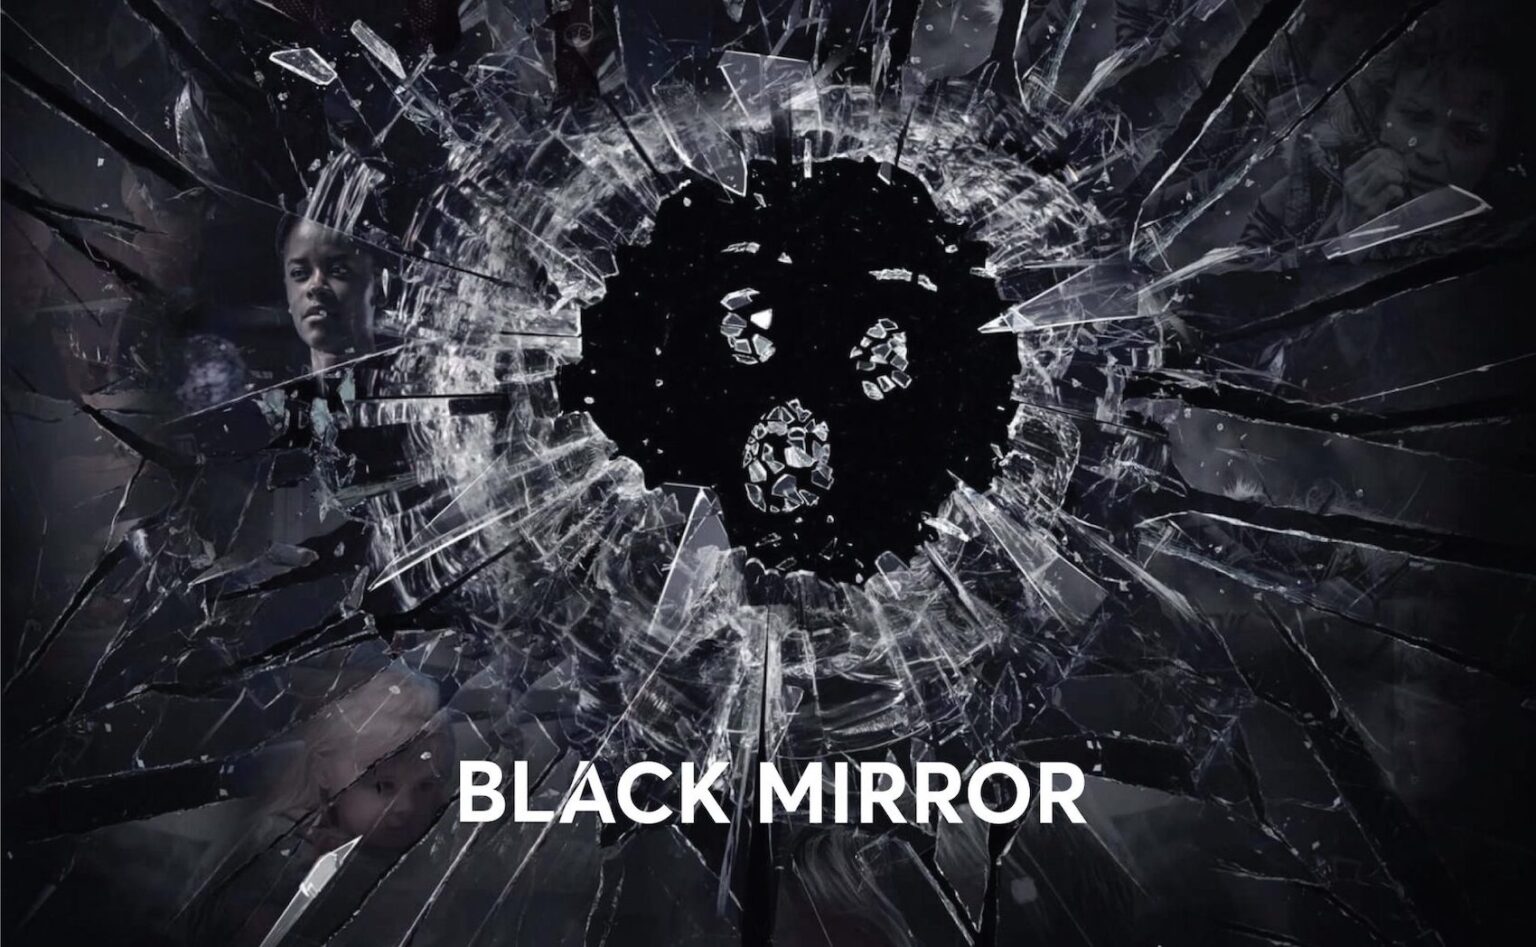 We’ve handpicked some of the best & most interesting 'Black Mirror' episodes for you to bingewatch now.